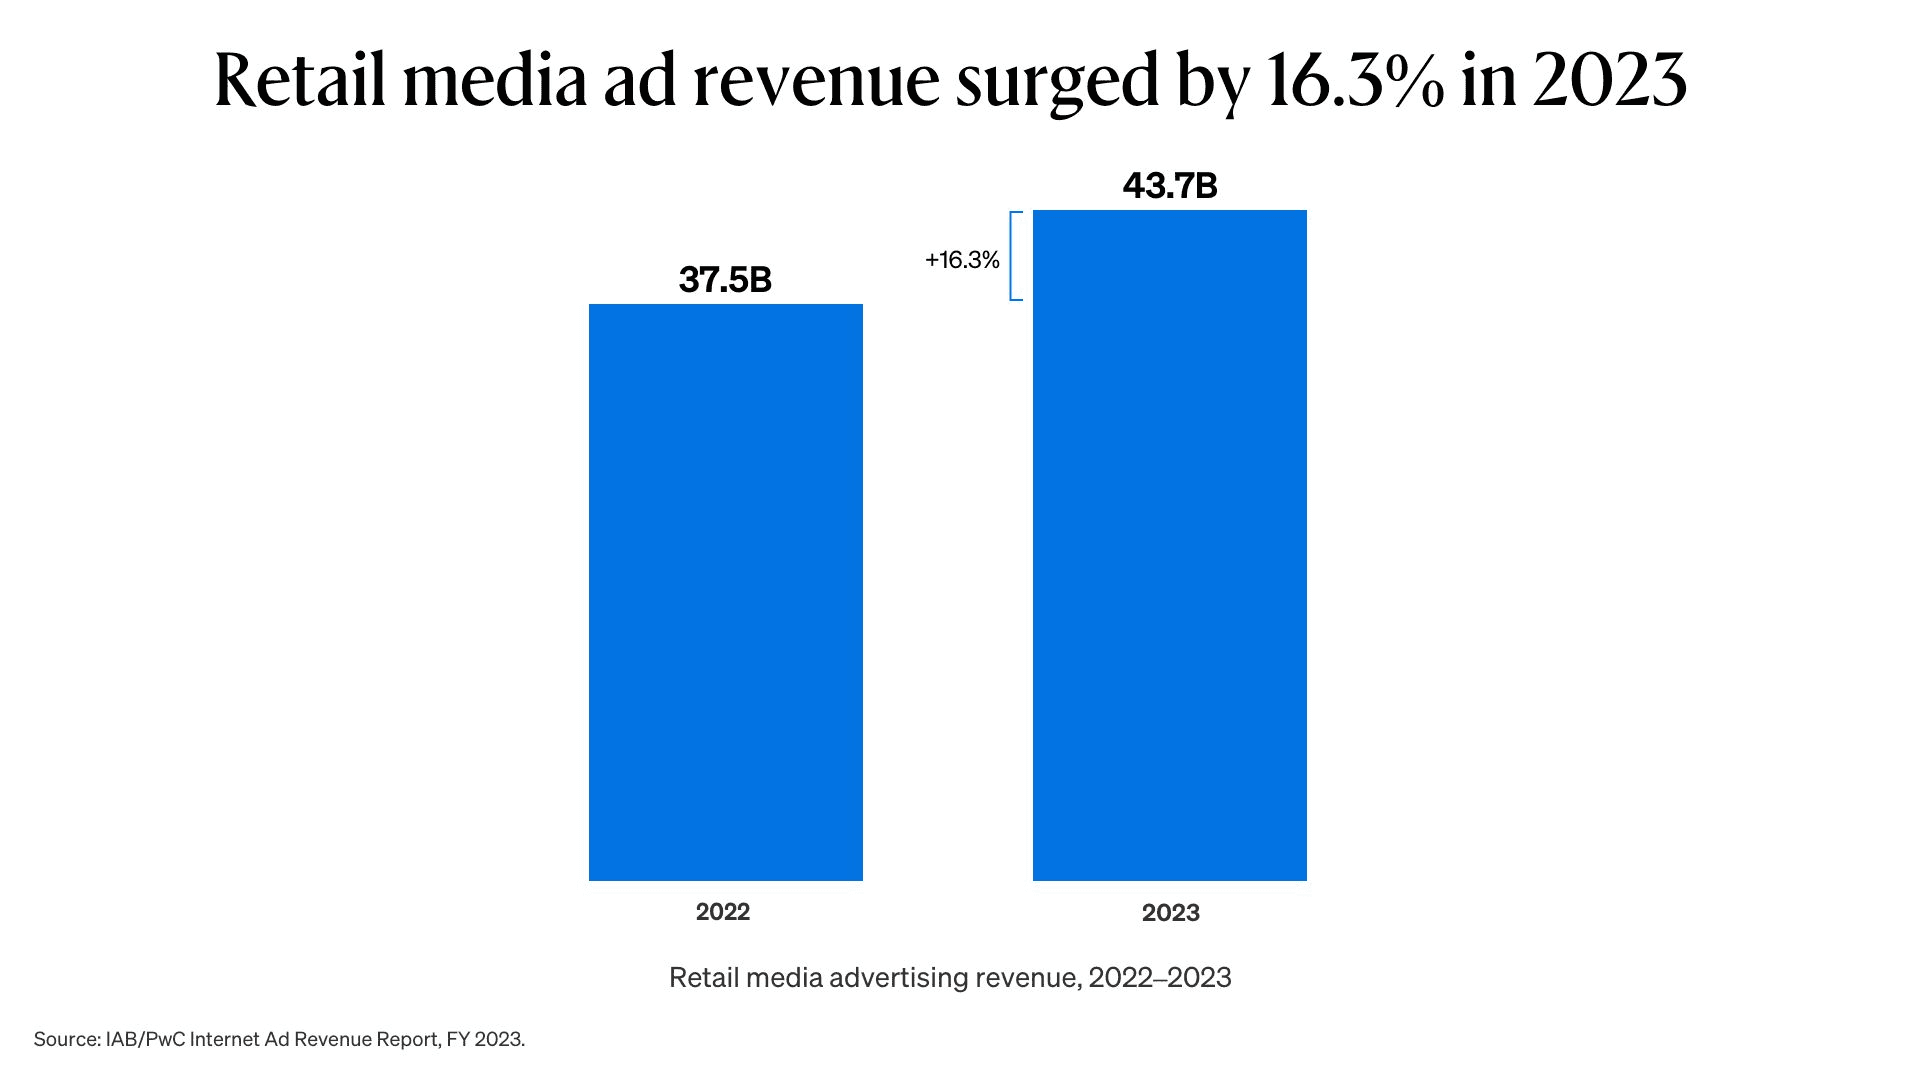 Readout data visual showing that retail media ad revenue surged by 16.3% from 2022 to 2023.